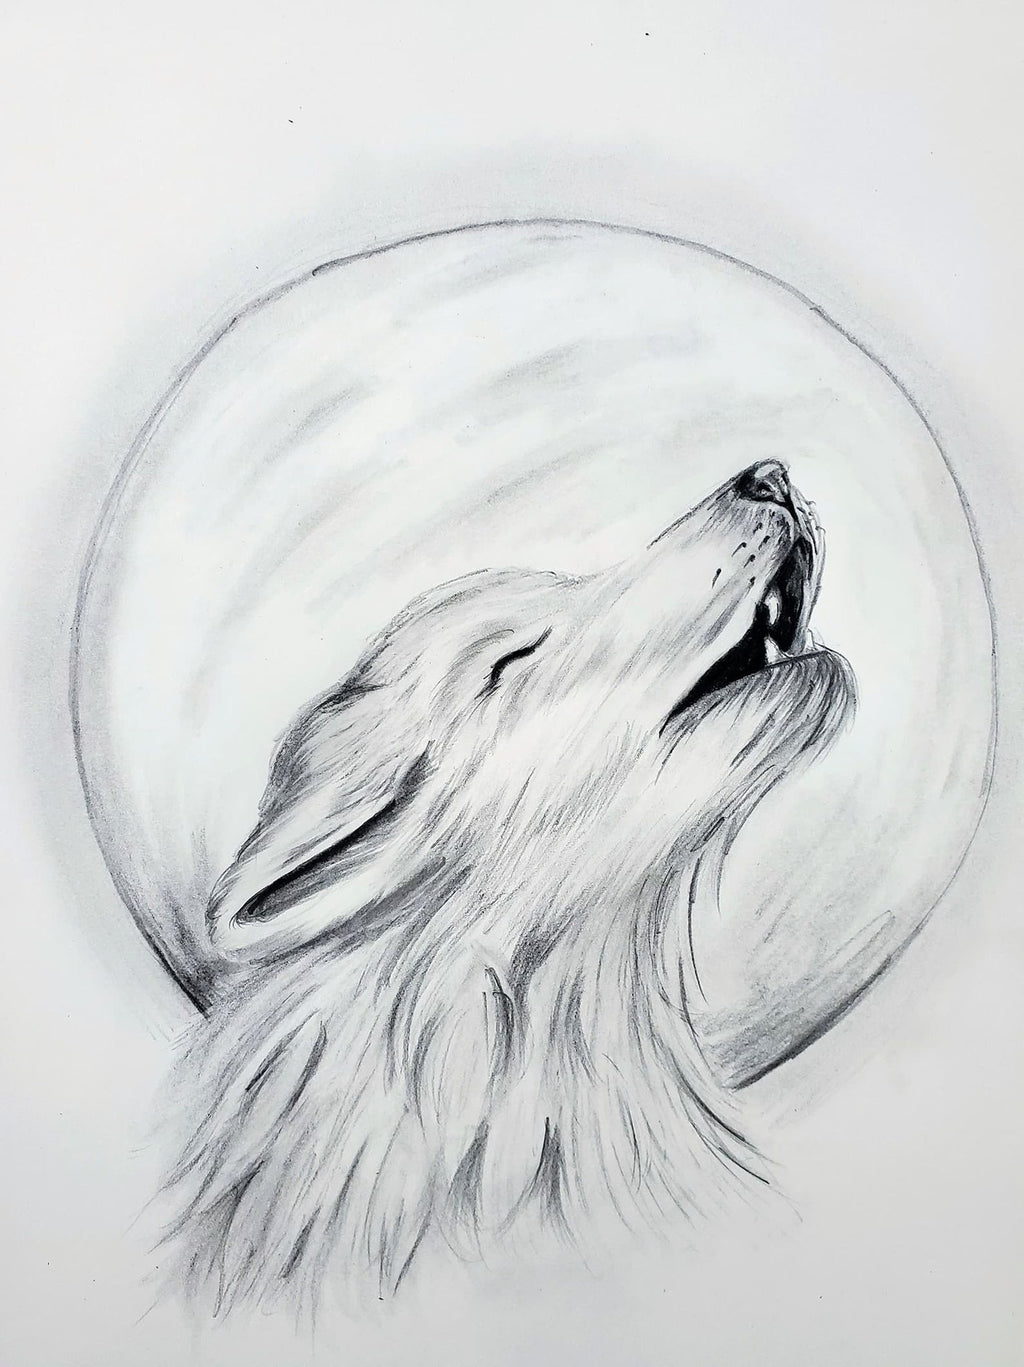 easy howling wolf drawings